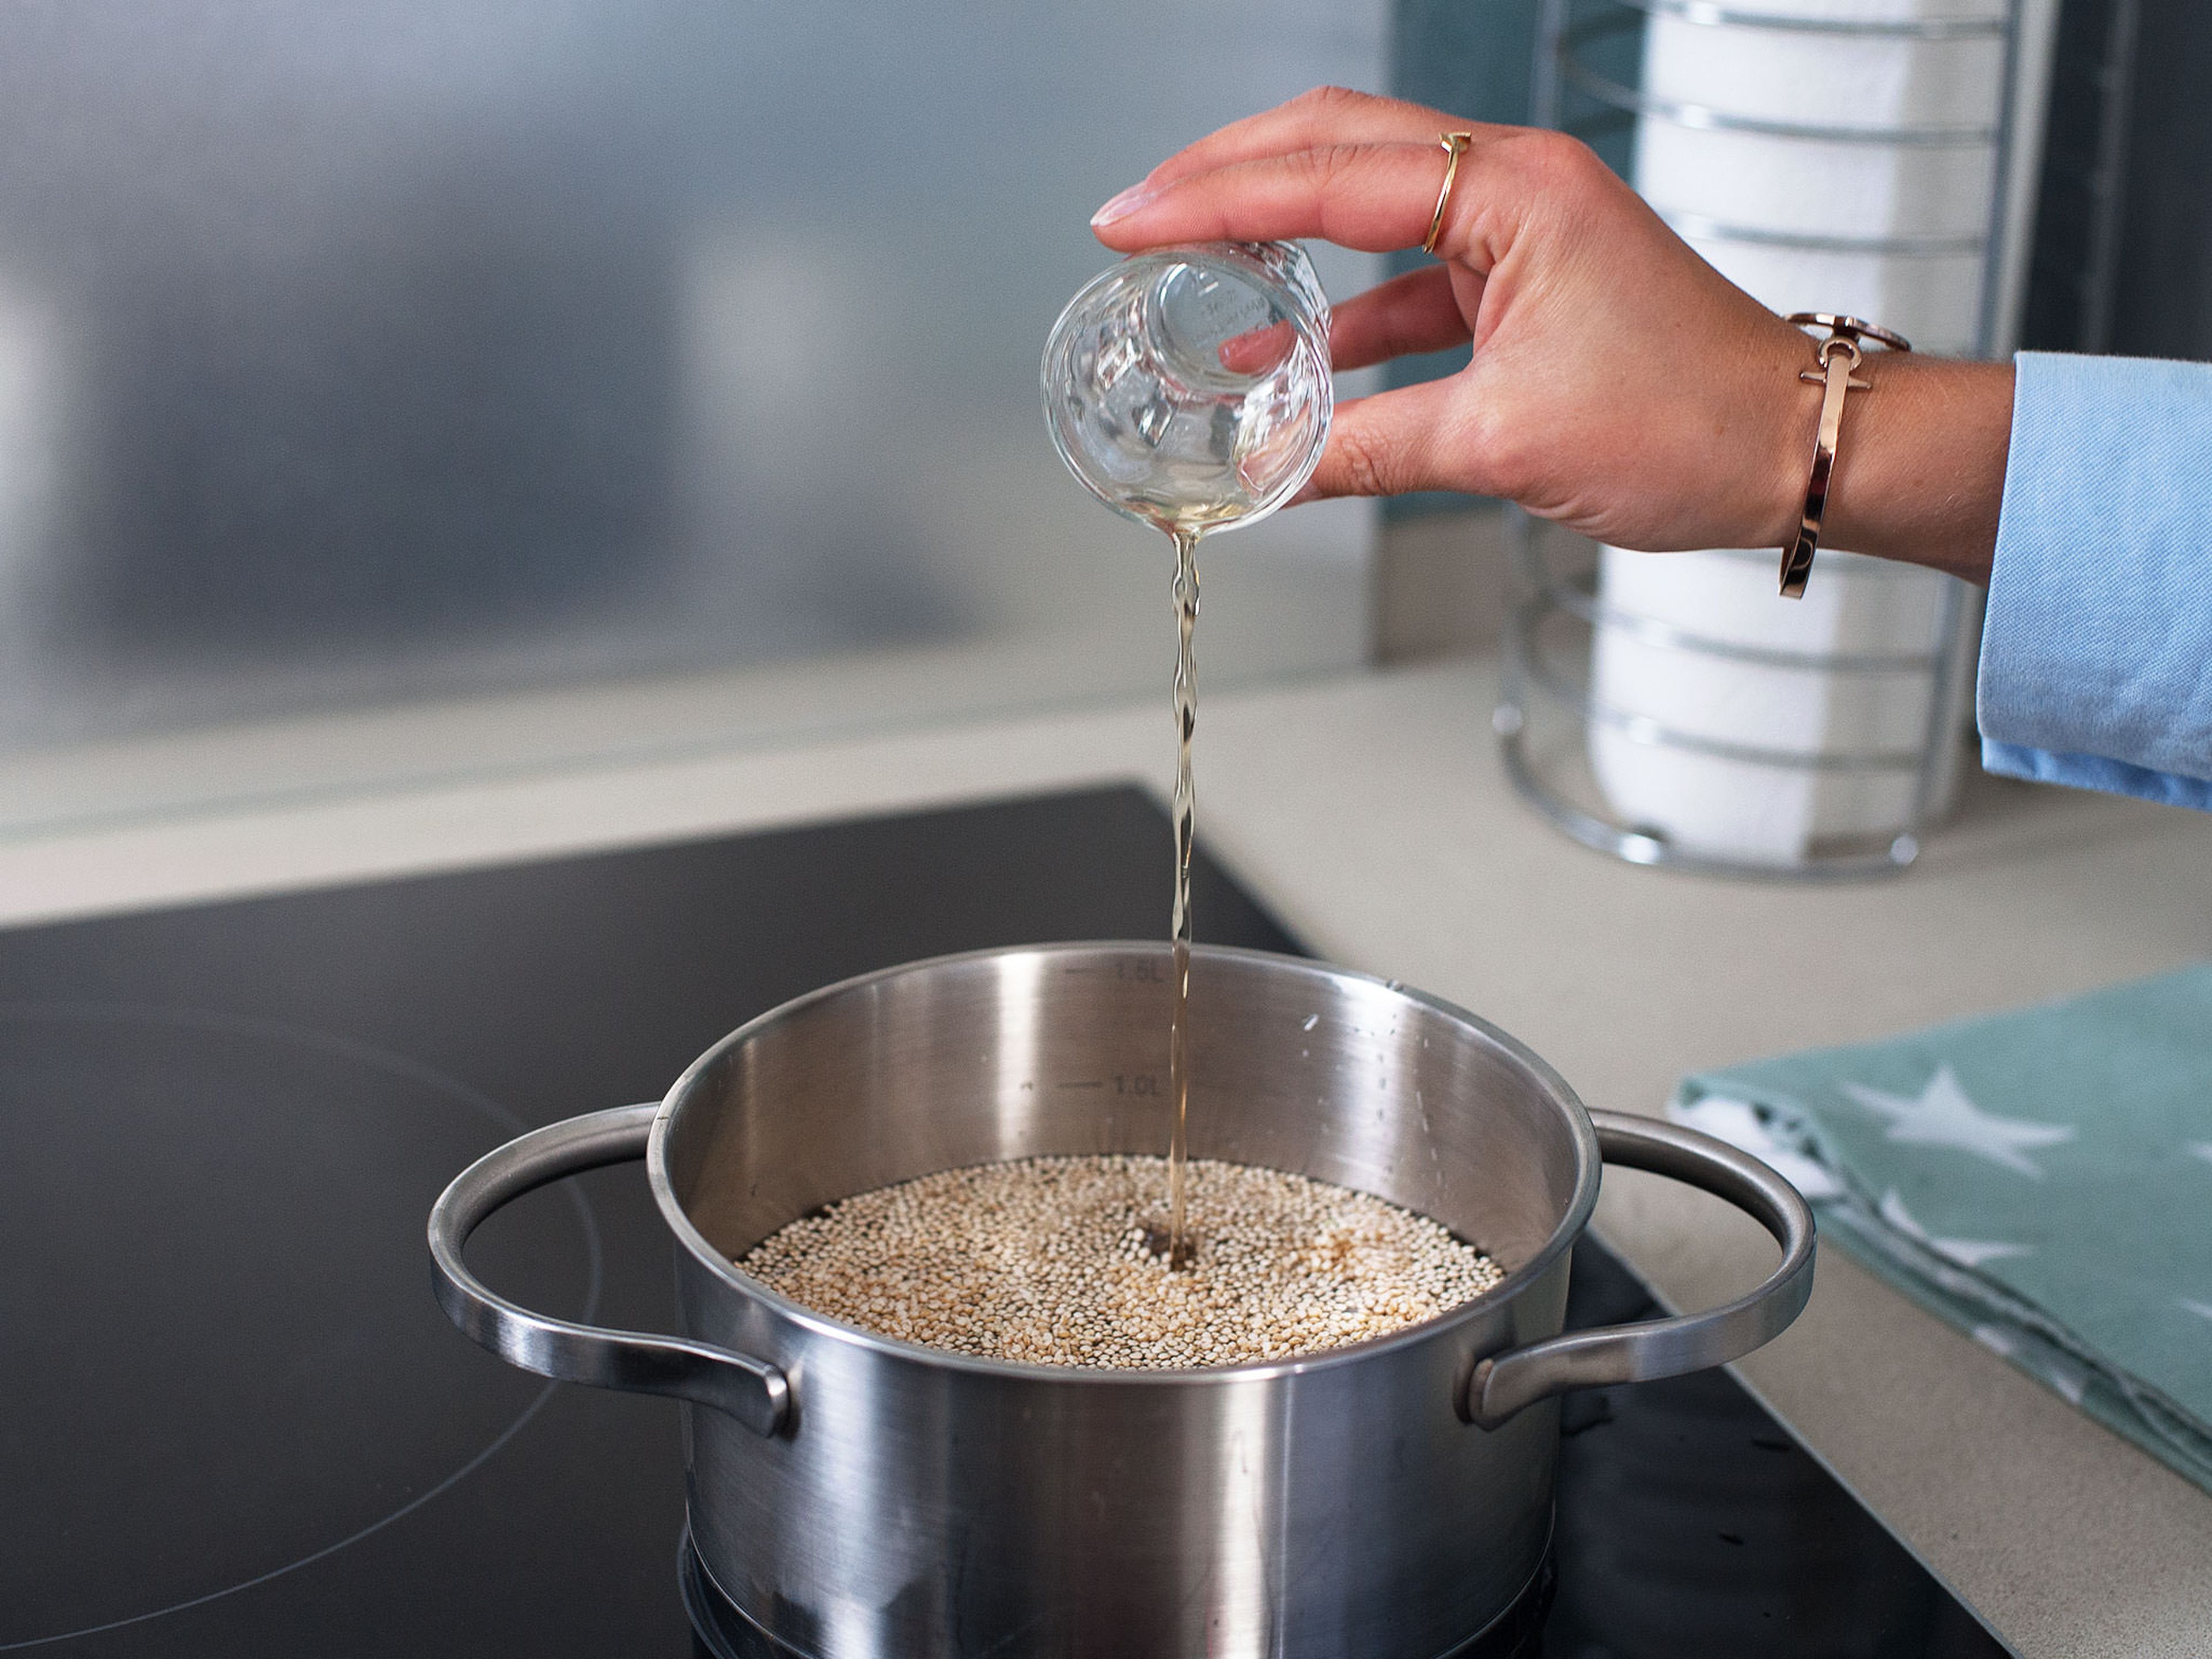 Meanwhile, prepare quinoa according to package instructions, boiling it with the cider vinegar and some of the lemon juice. When little white rings begin to form around the grains, drain any excess water and set quinoa aside.